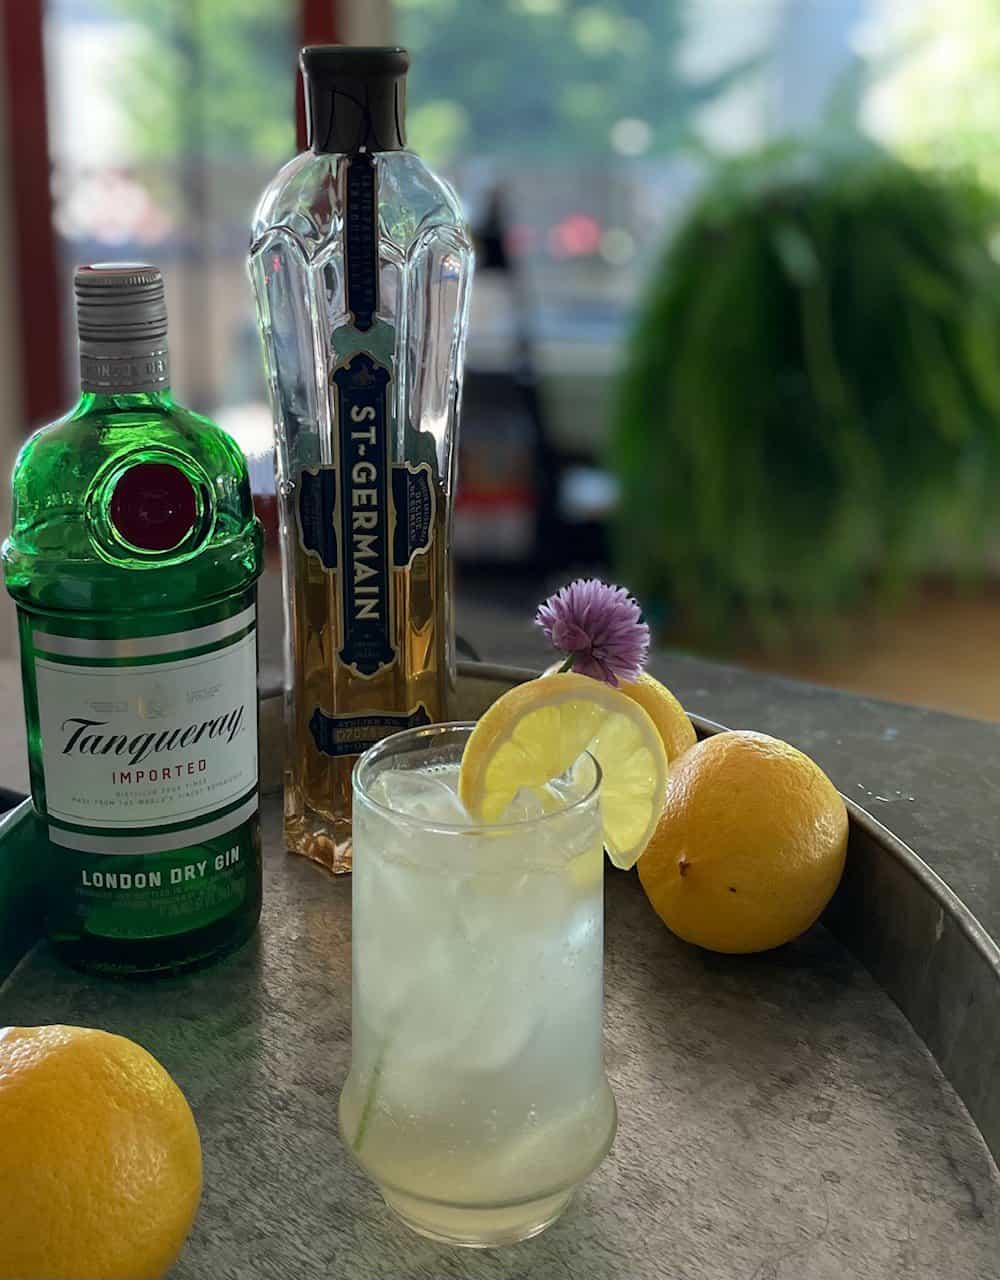 a tall clear glass filled with ice and pale yellow liquid garnished with lemon wedge on a platter with a bottle of gin, a bottle of elderflower liqueur, and three lemons.